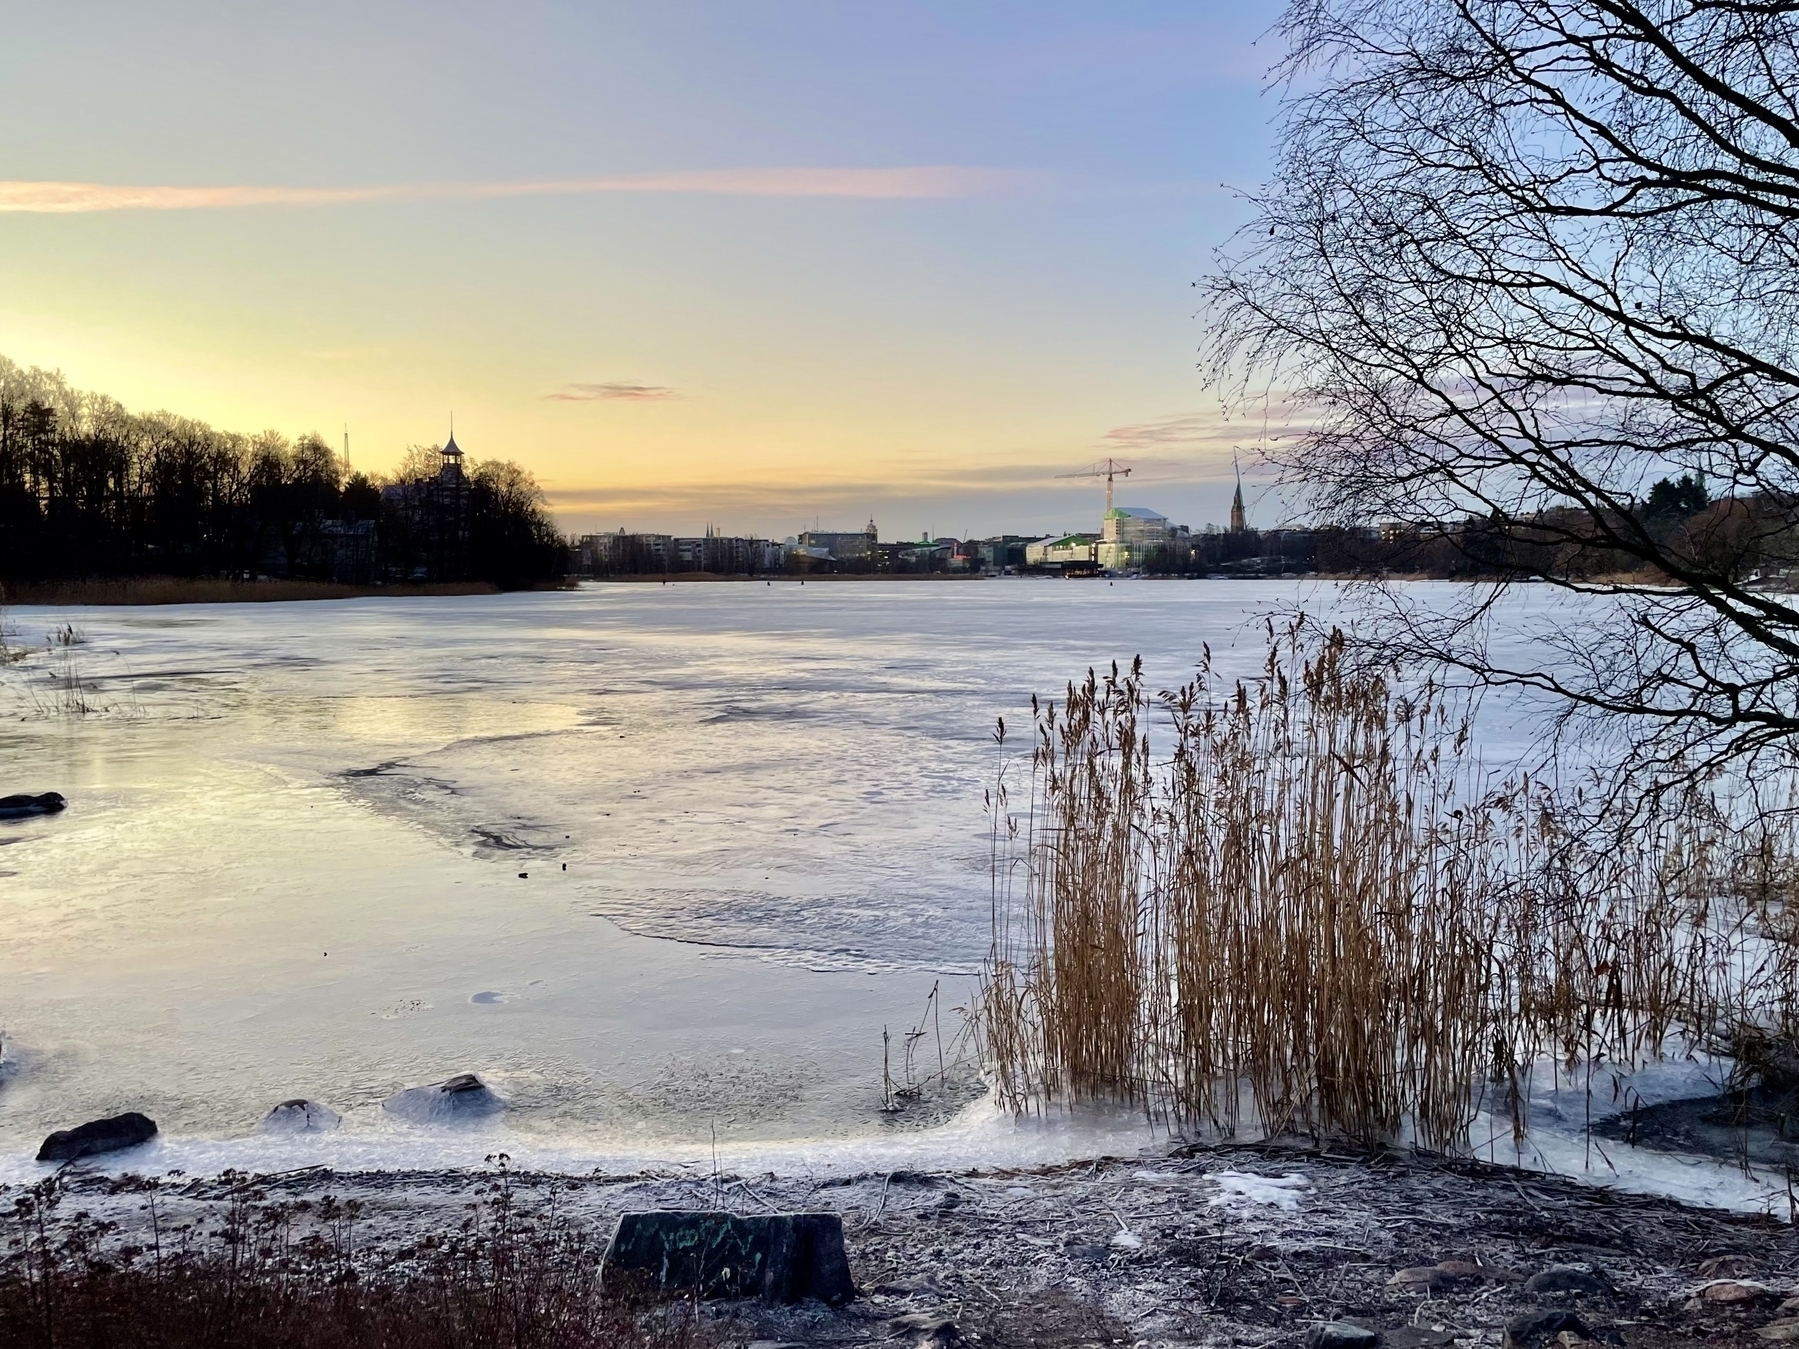 A view of a frozen bay at winter sunrise. There are trees and a city skyline in the background